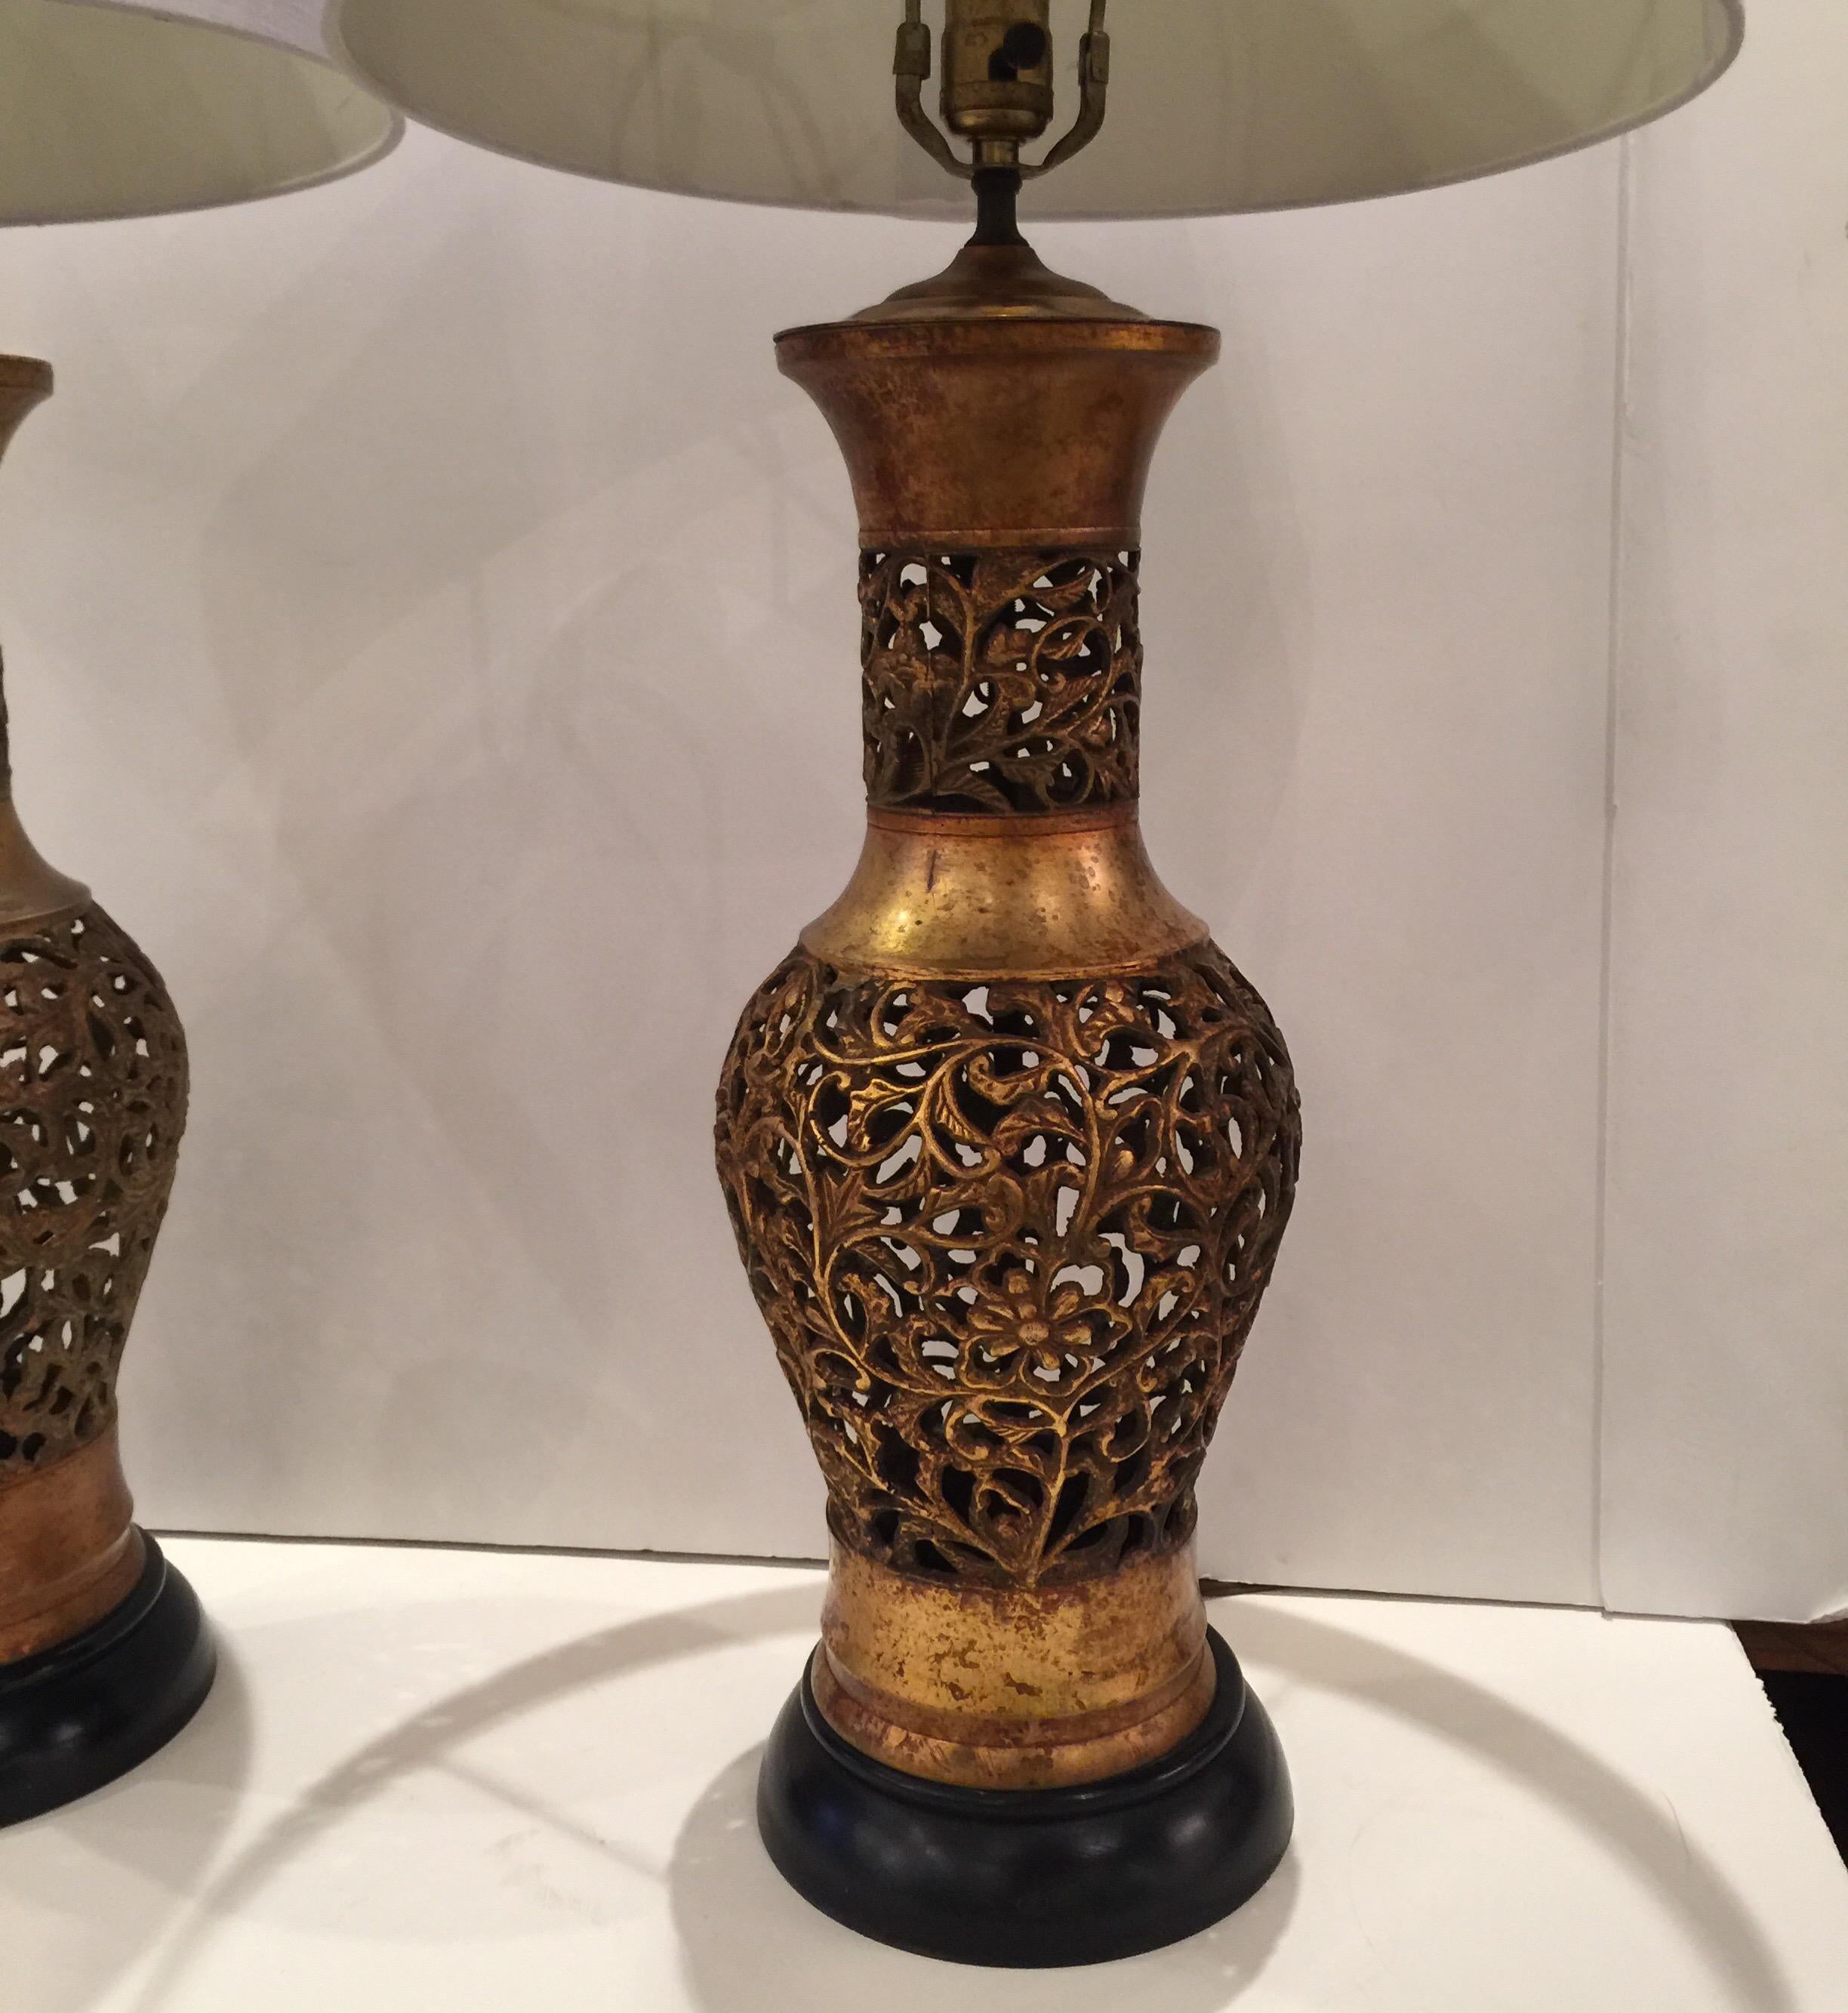 Pair of reticulated chinoiserie urn weather gilt table lamps with wood bases
Dimensions: 8